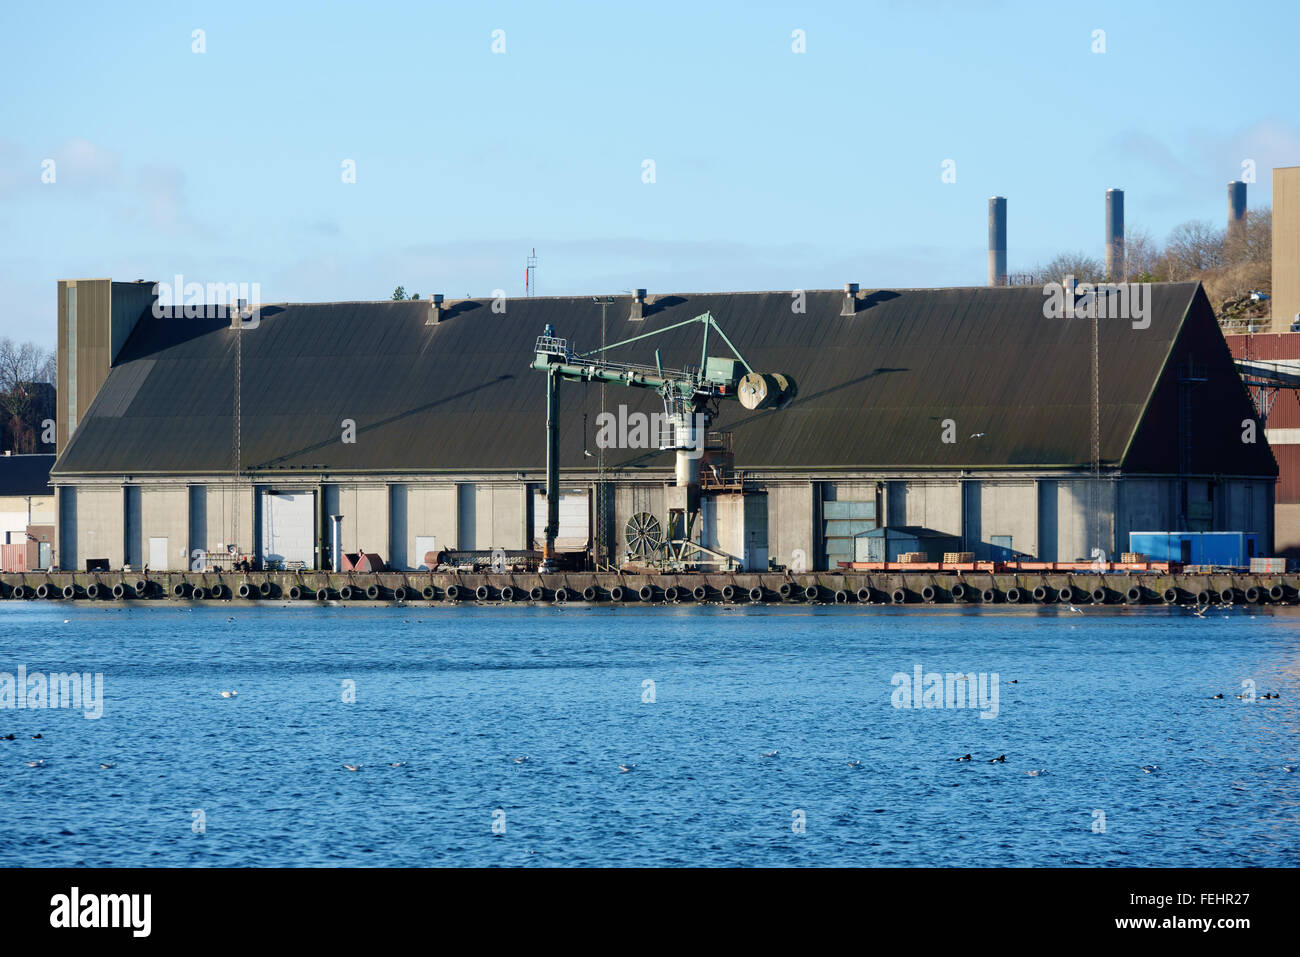 Karlshamn, Sweden - February 04, 2016: An industrial area in the harbor of Karlshamn. Here is an old storage building with a cra Stock Photo